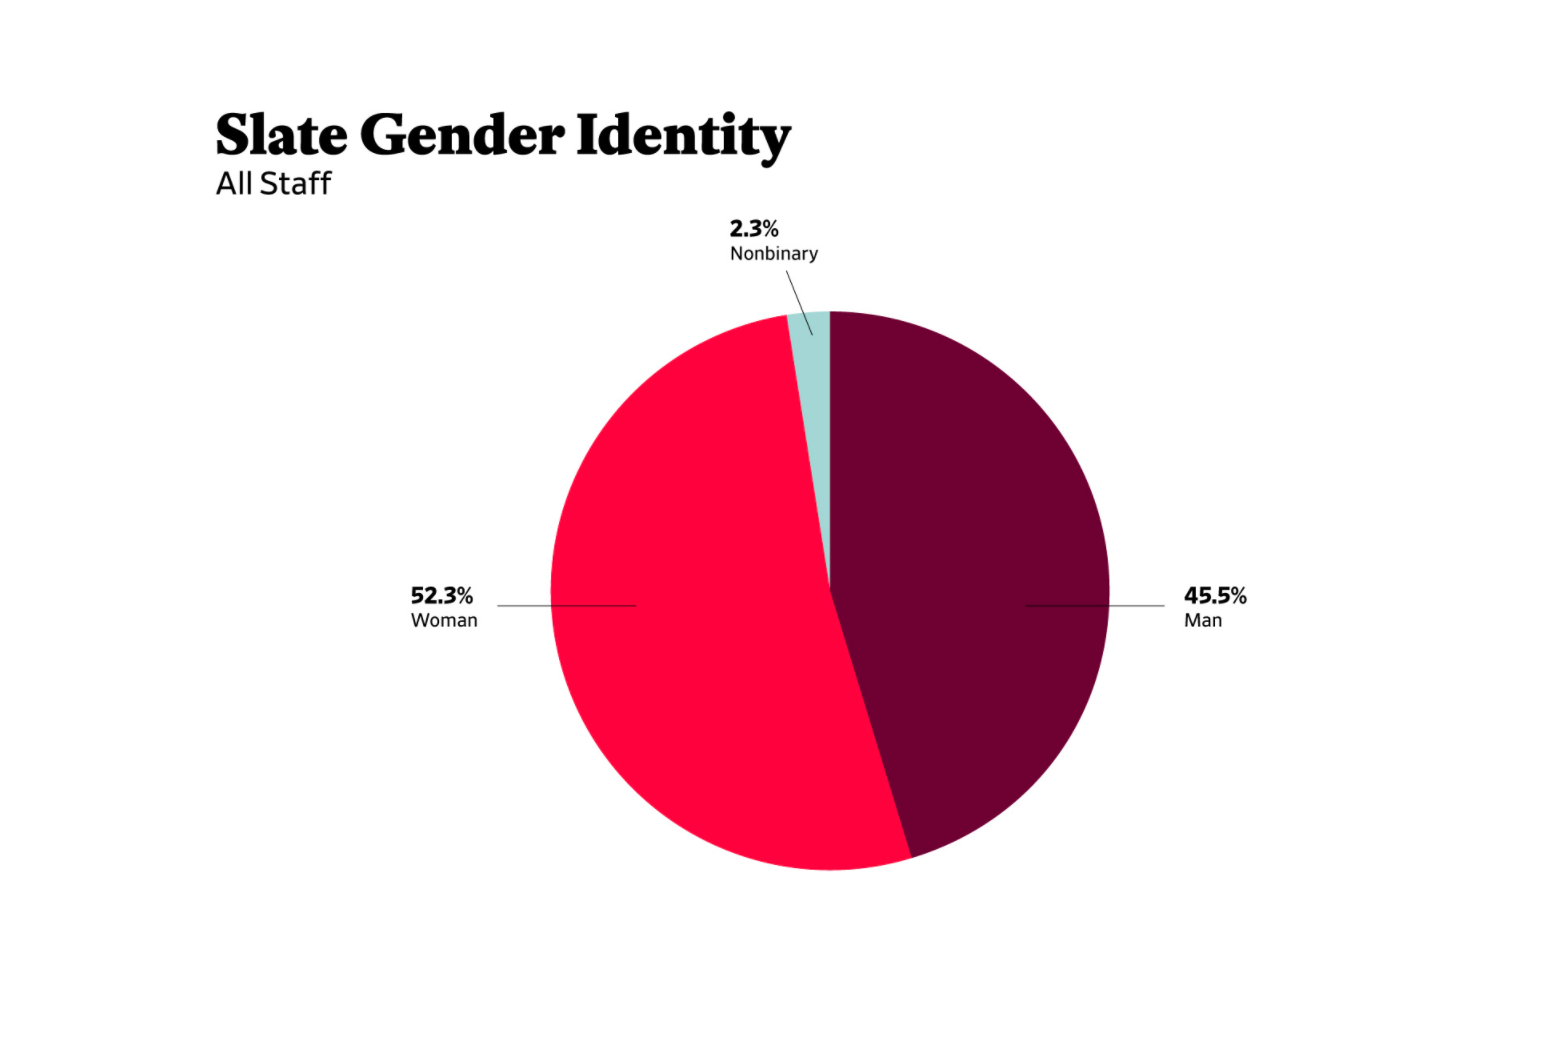 A pie chart showing gender identity of all Slate staff.